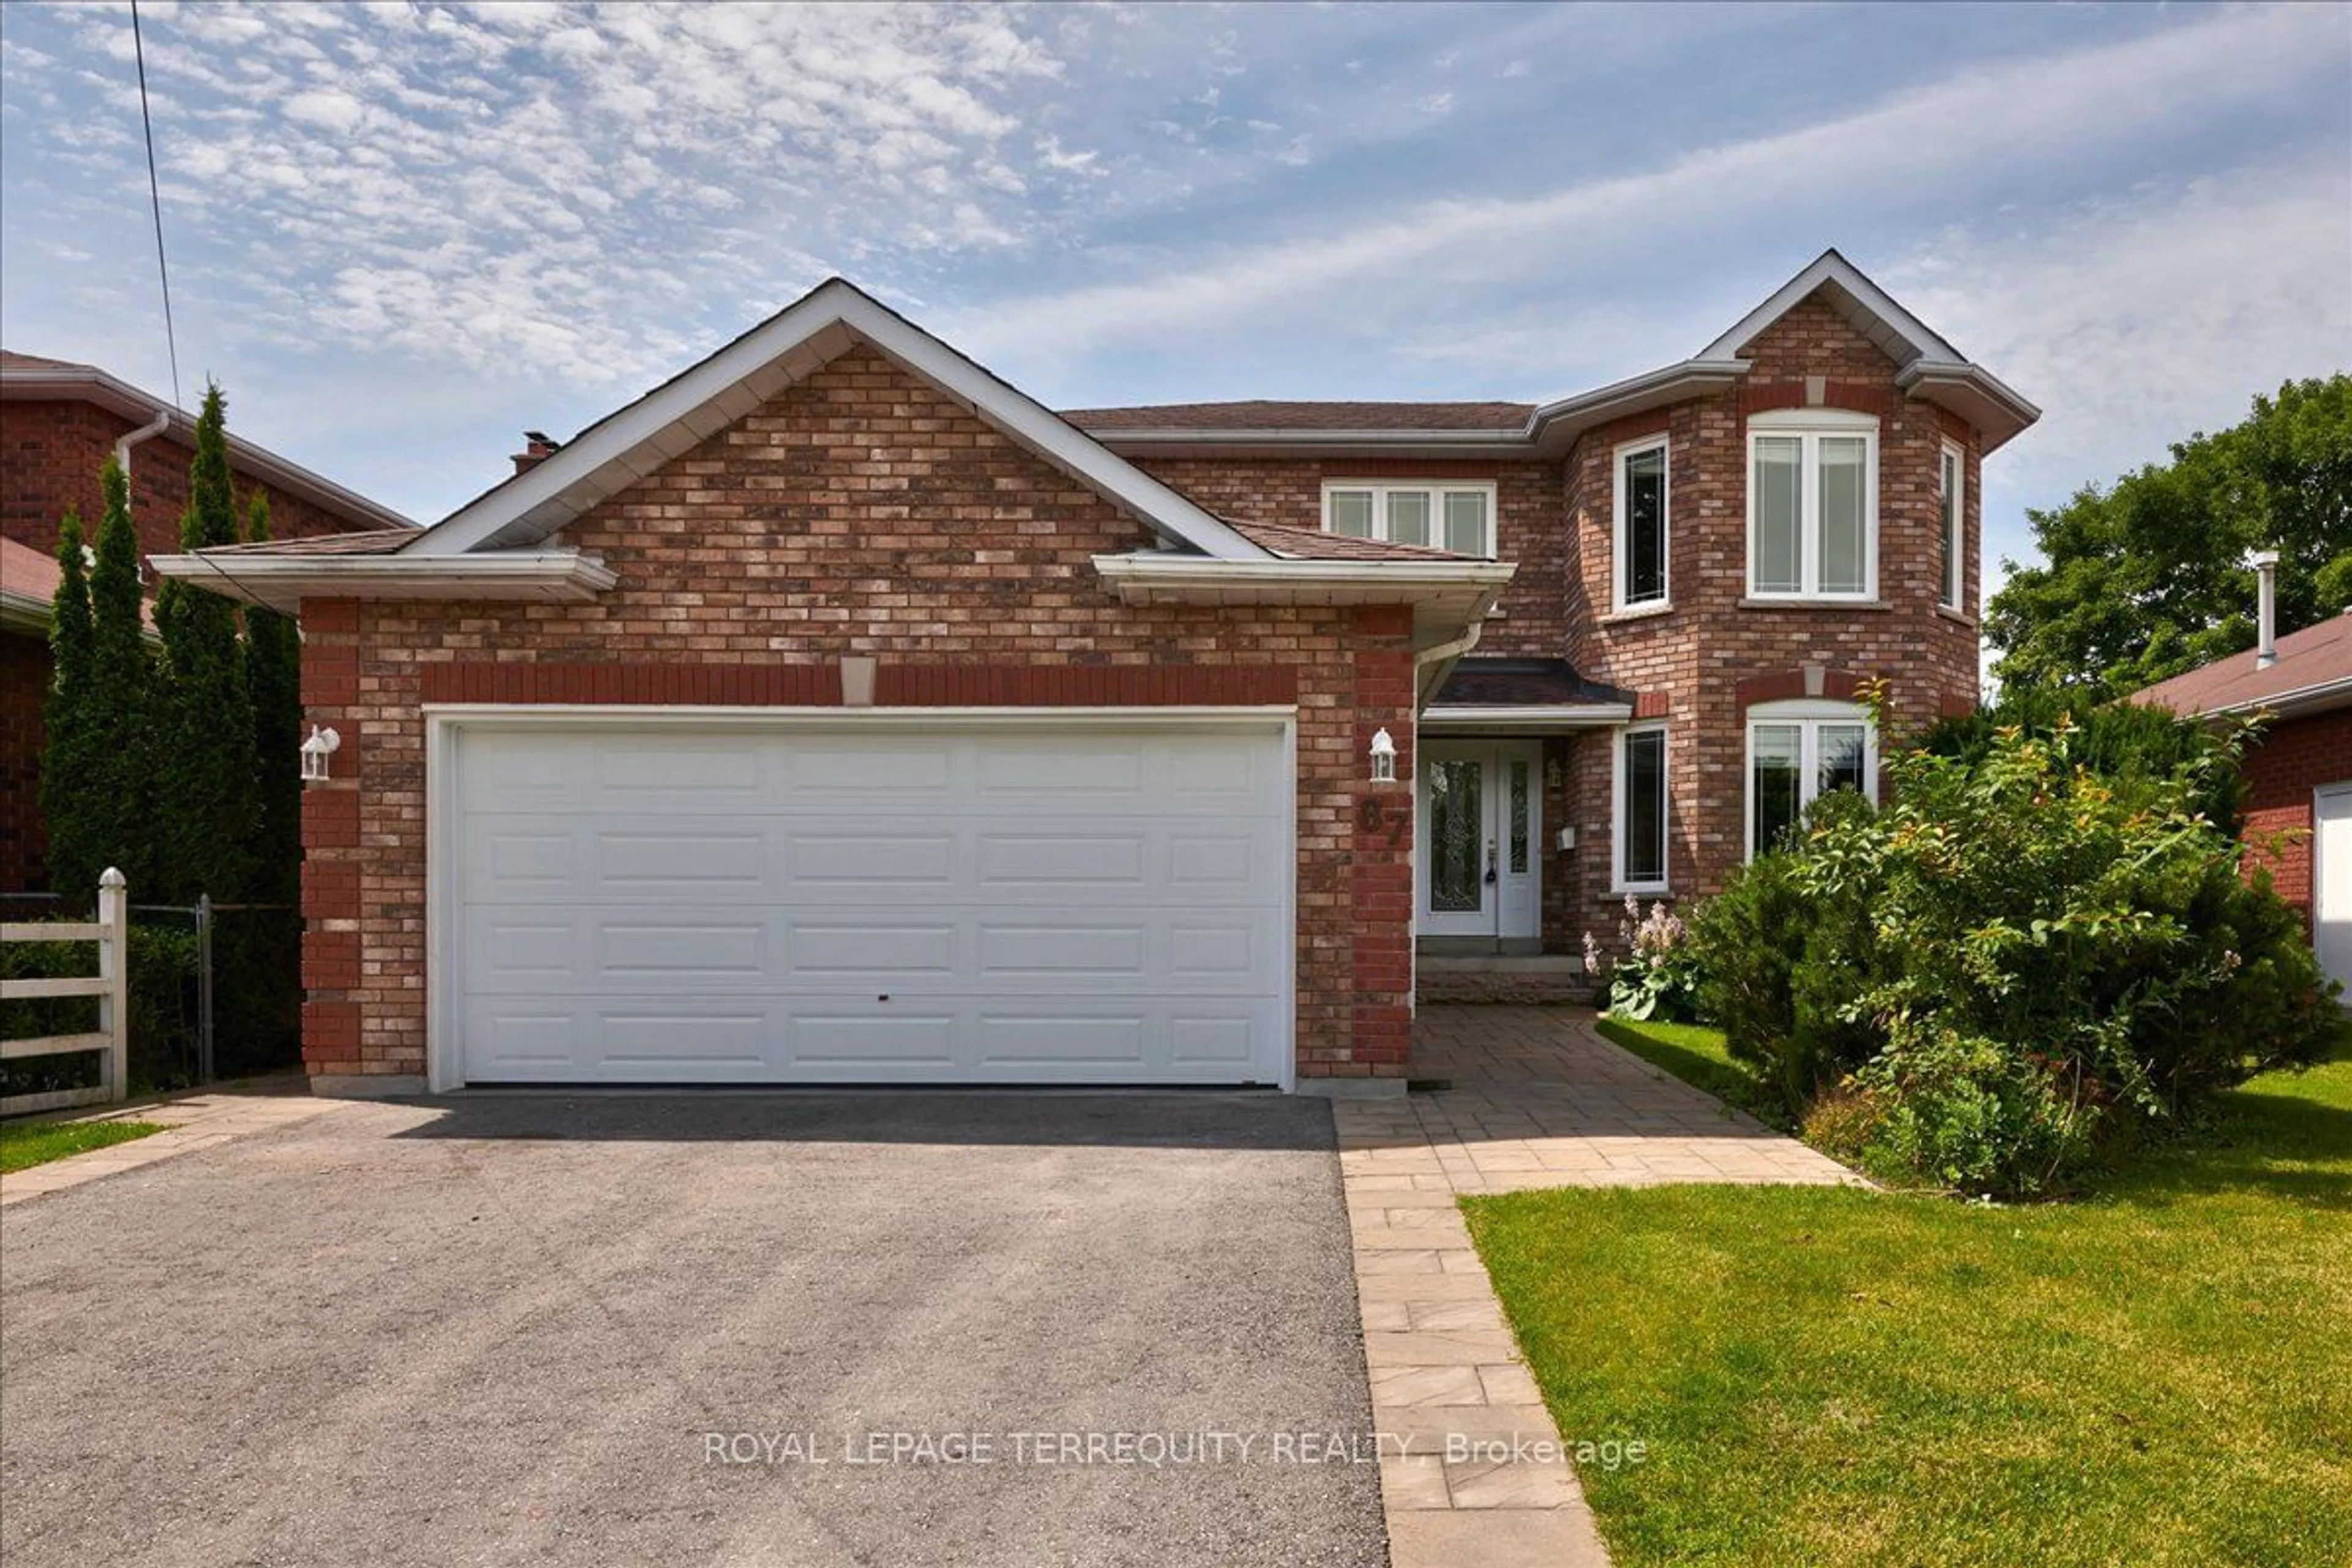 Home with brick exterior material for 87 Arthur Ave, Barrie Ontario L4M 6H6